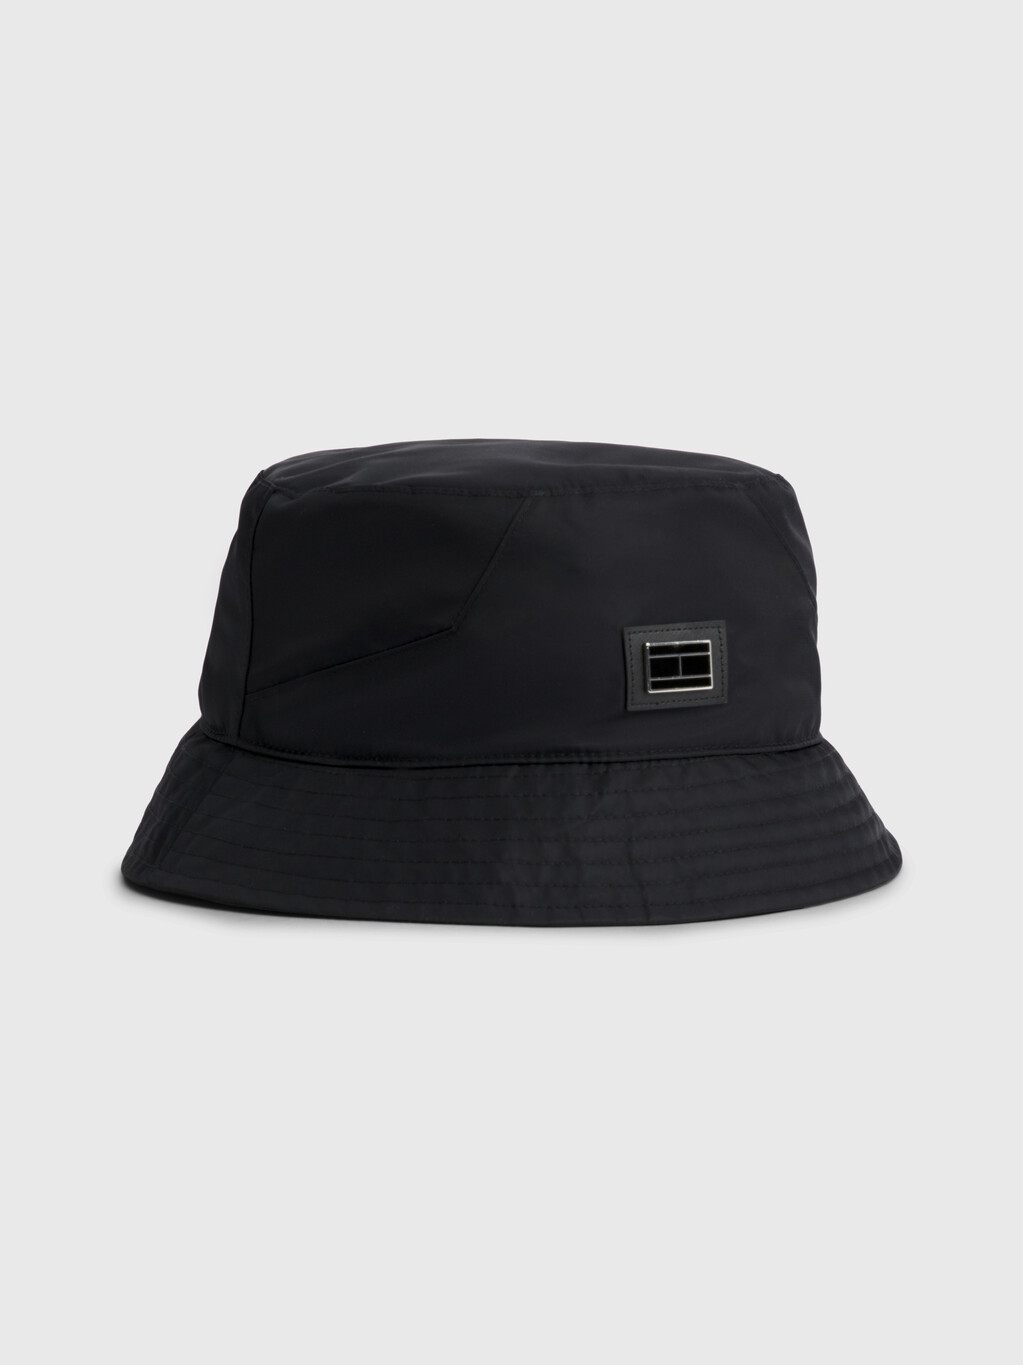 TH Tech Recycled Bucket Hat, Black, hi-res